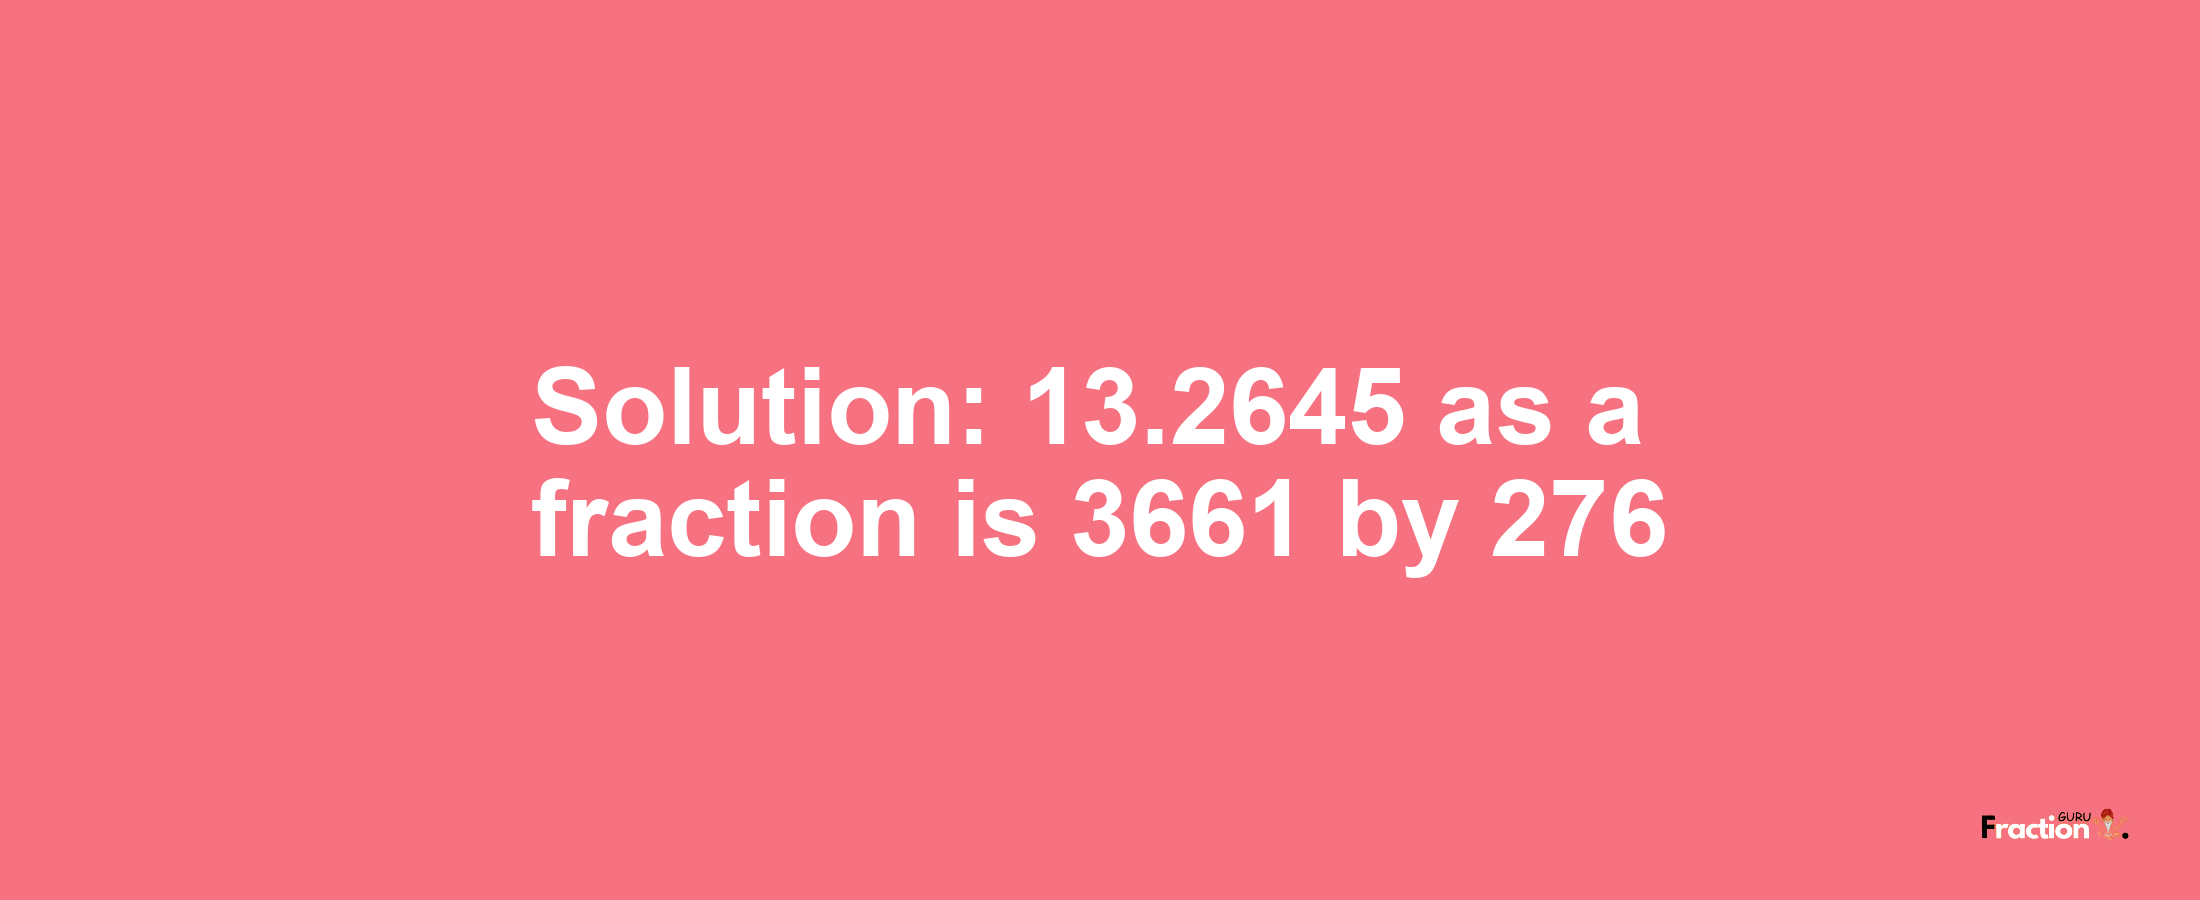 Solution:13.2645 as a fraction is 3661/276